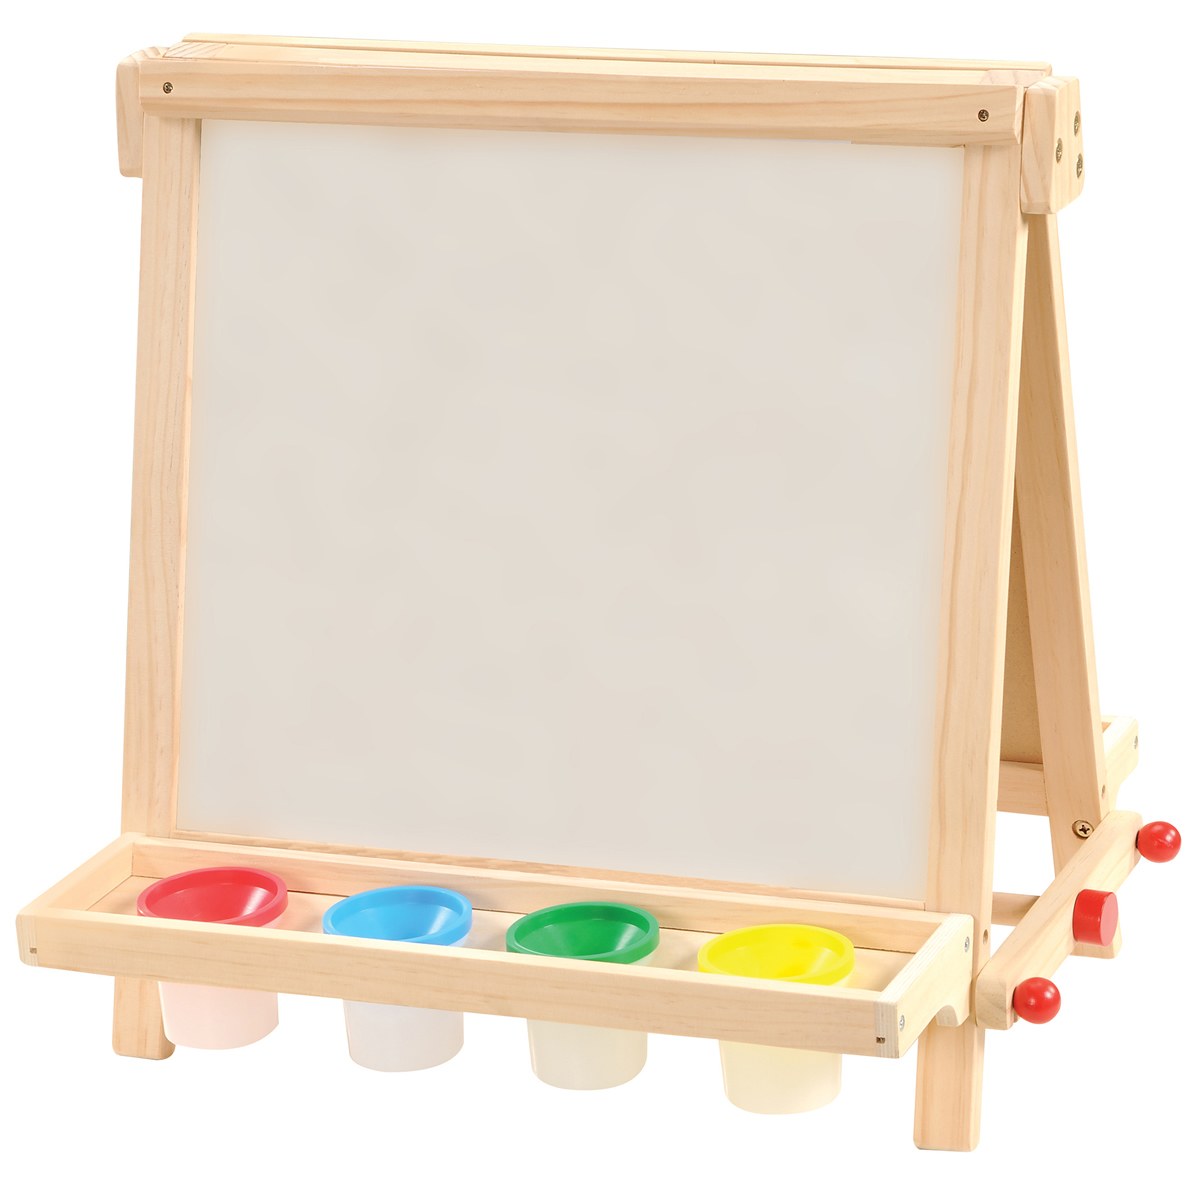 Kaplan Early Learning Company Wooden Tabletop Easel